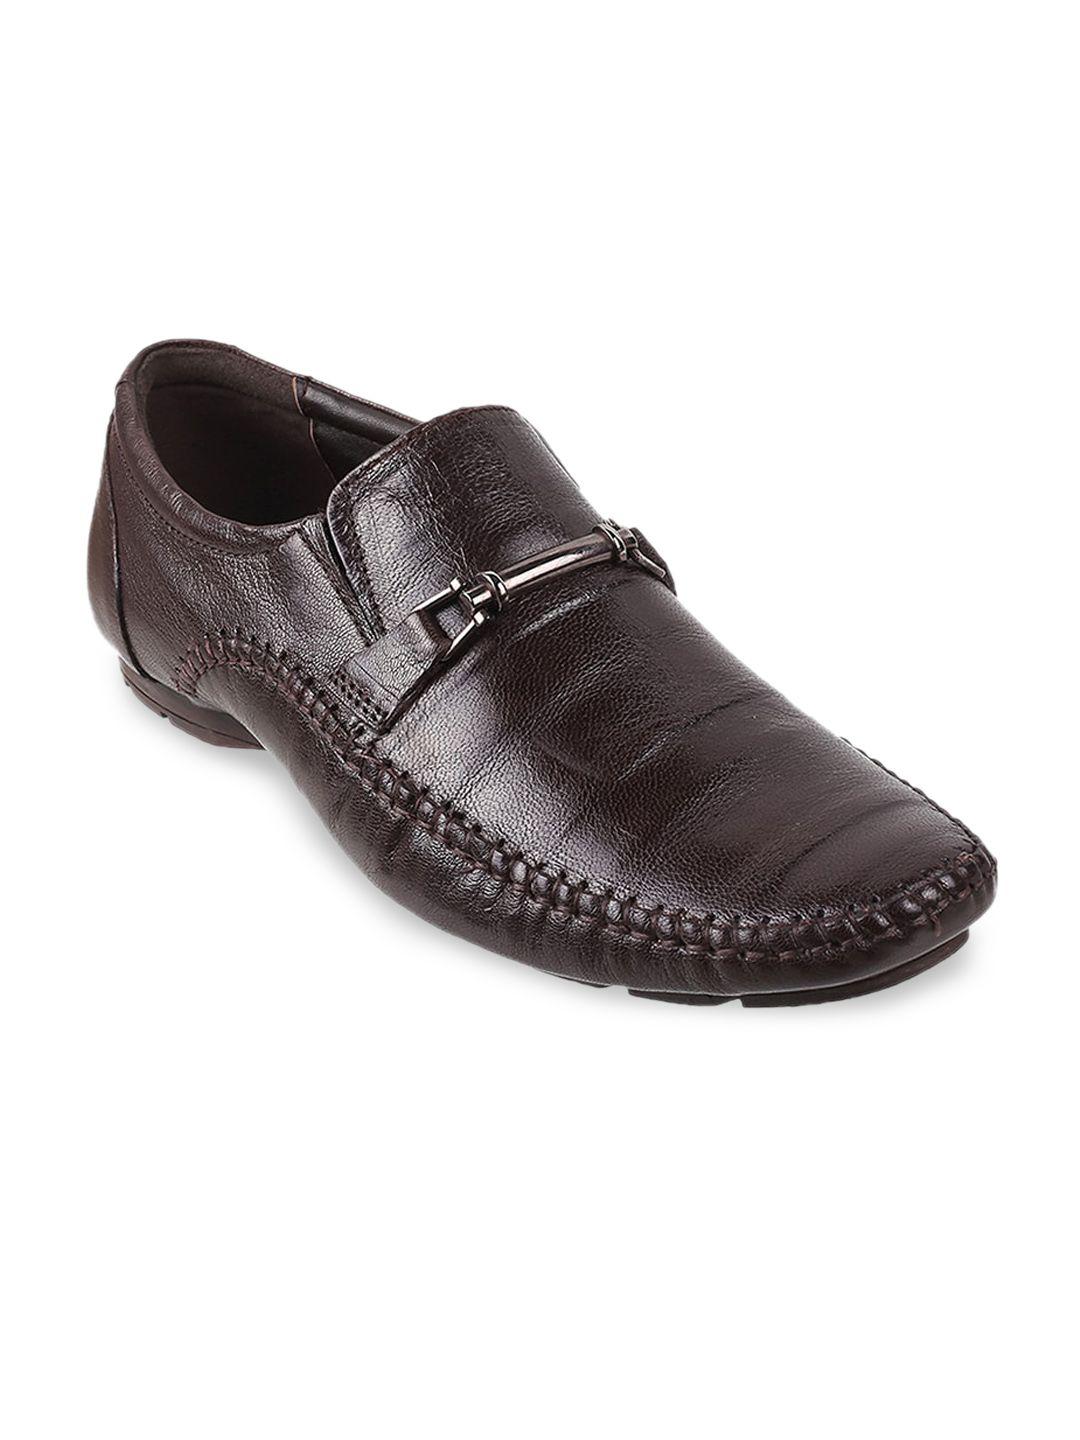 metro men brown leather driving shoes